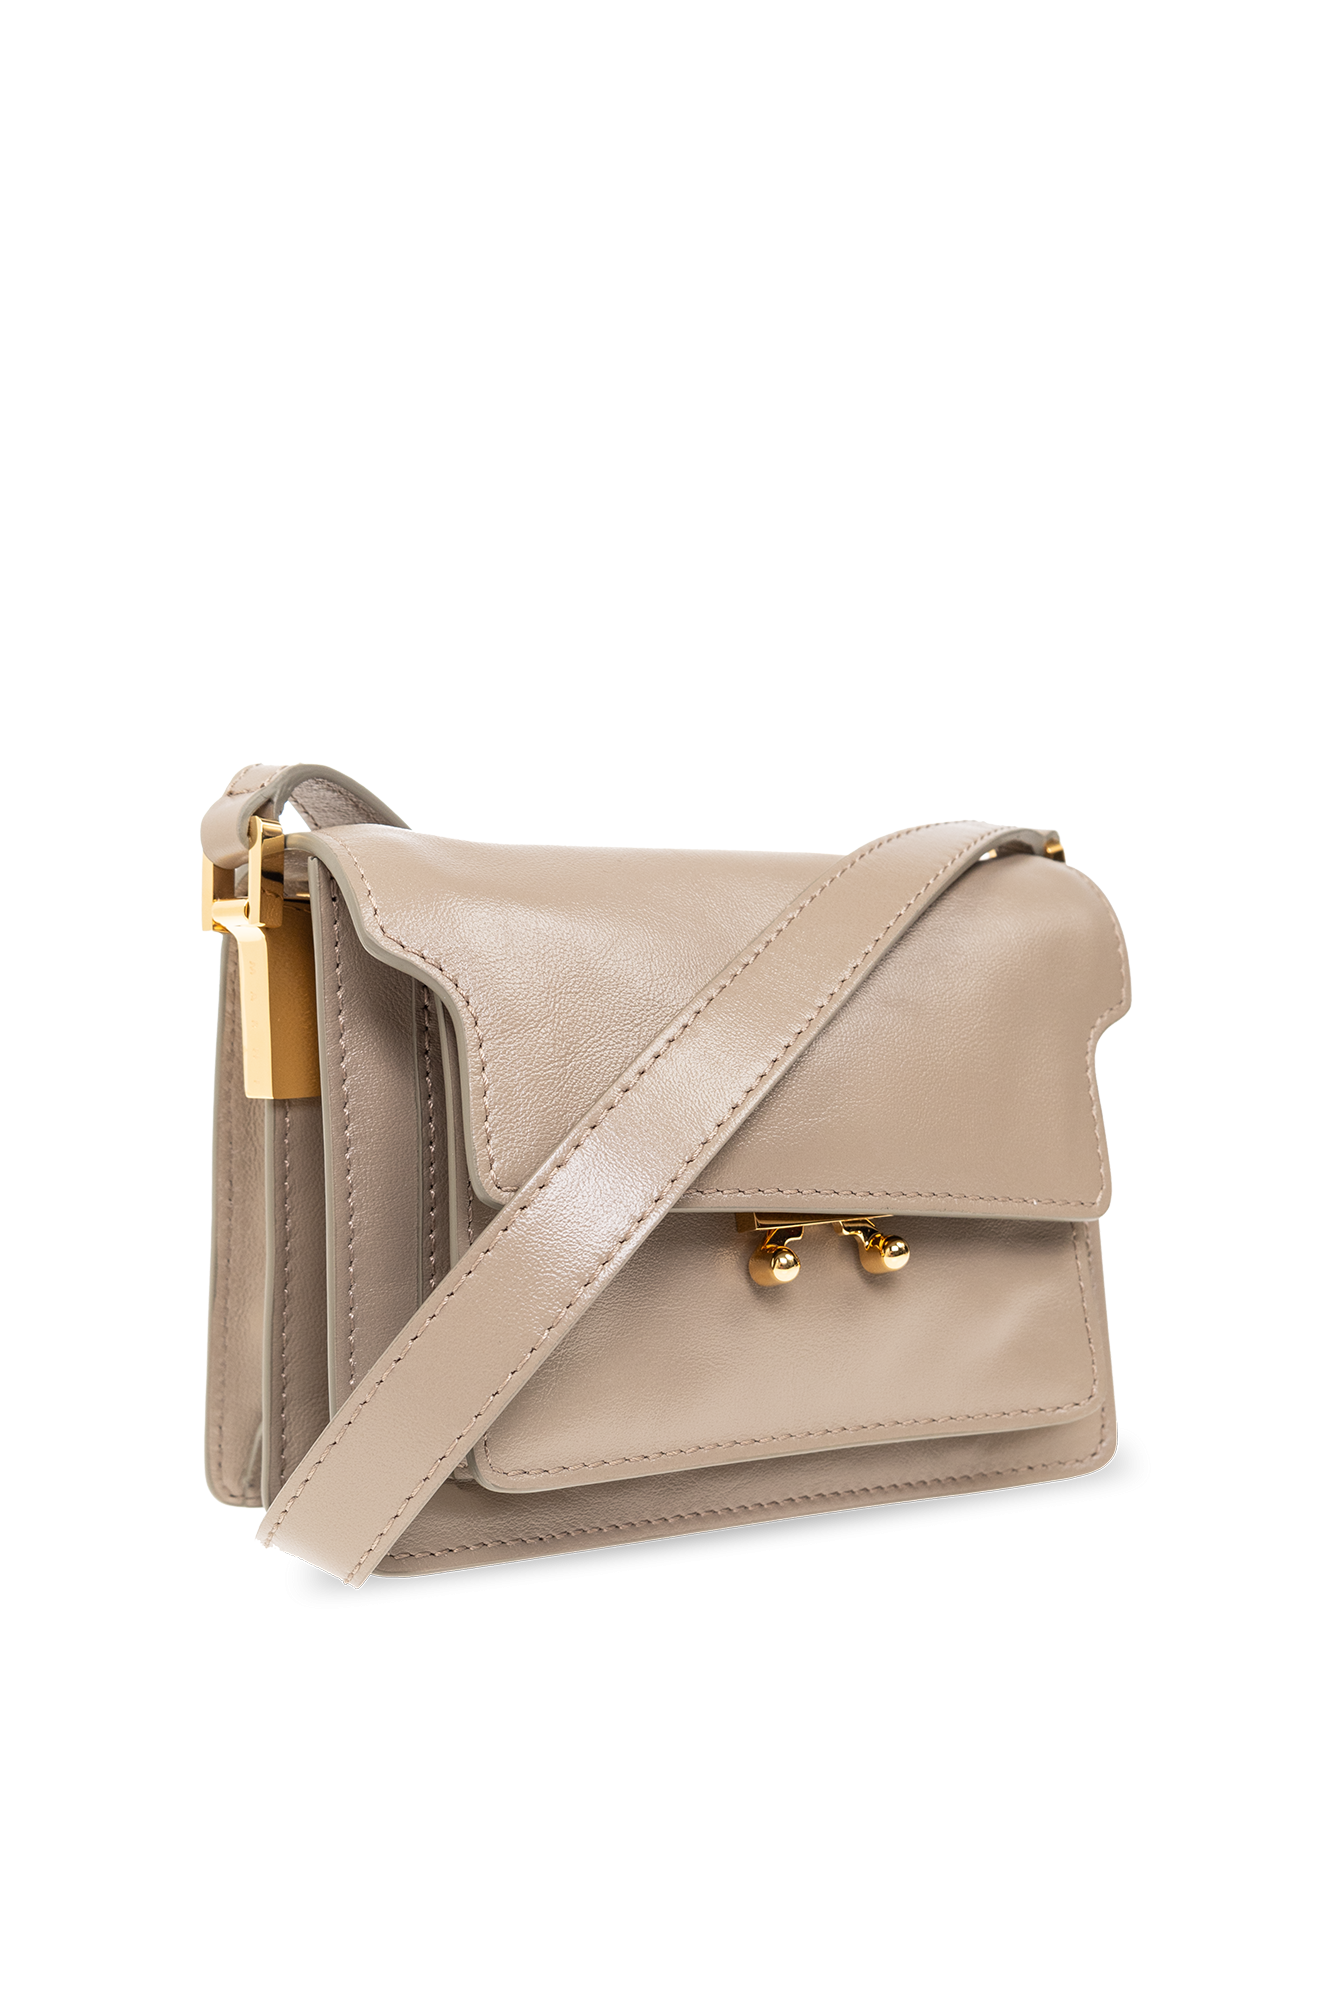 Marni - Trunk Shoulder Bag - Women - Cotton/Calf Leather/Calf Leather/Steel/Brass - One Size - Grey